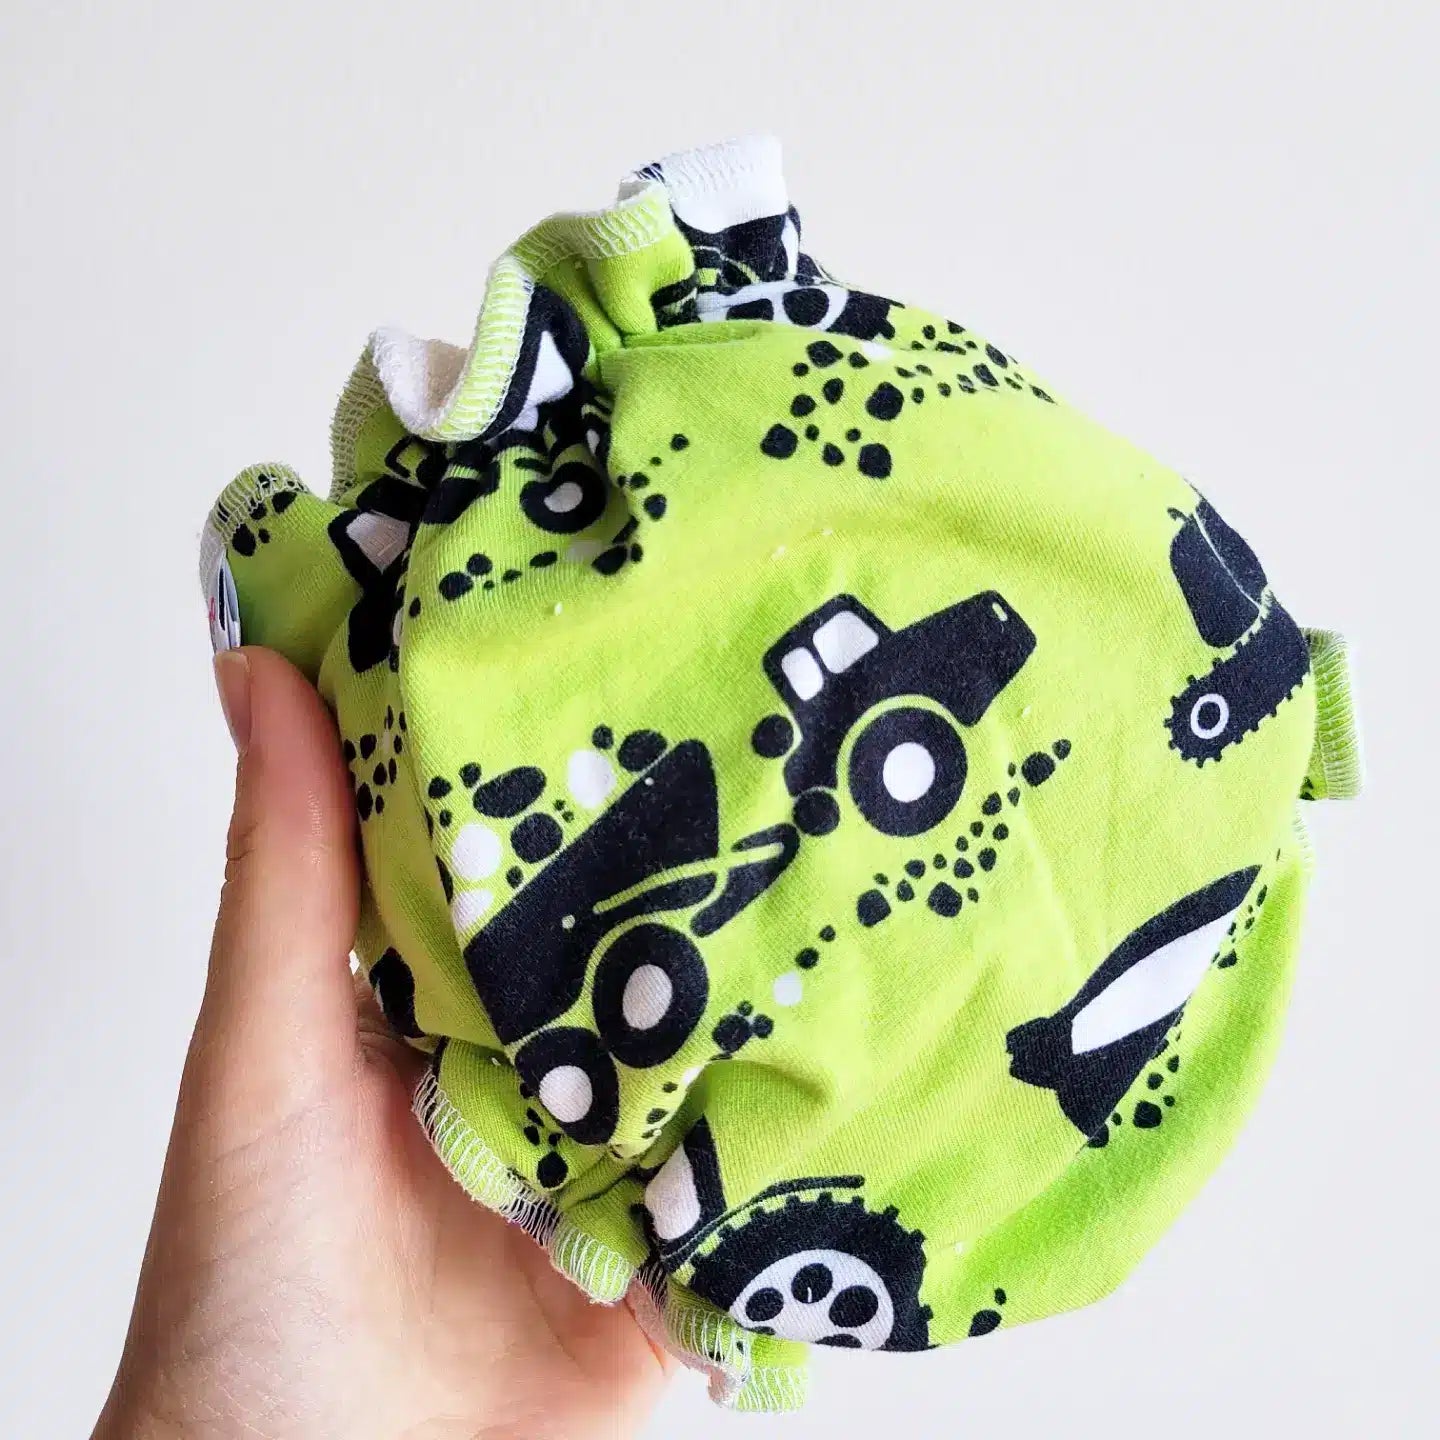 Boo&Boo Fitted Nappy Bamboo Nappy (One Size)